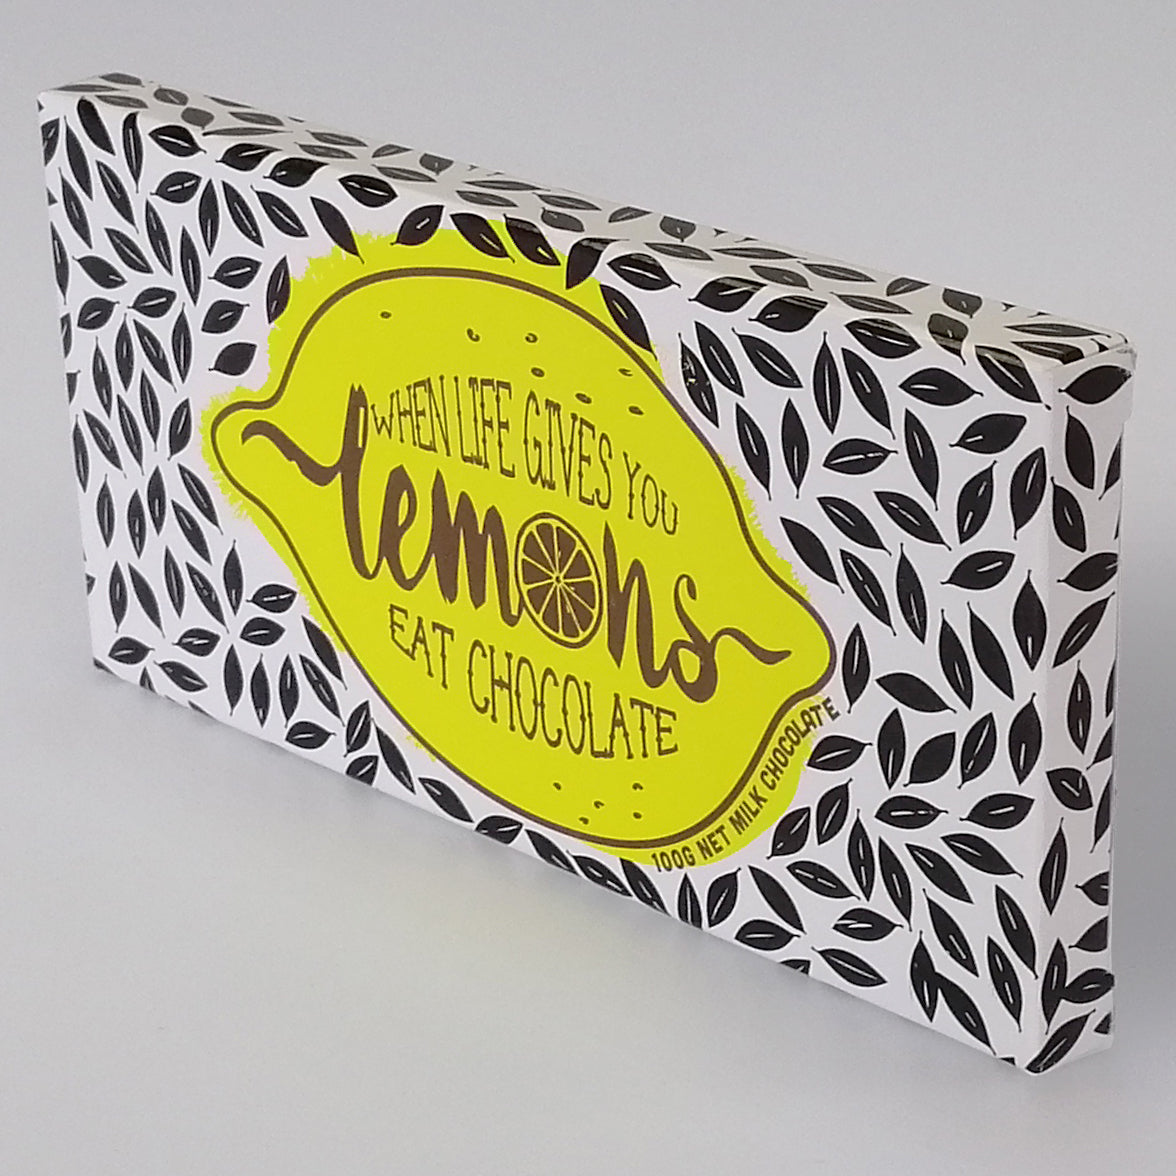 Bloomsberry & Co 'When Life Gives You Lemons' Milk Chocolate Bar